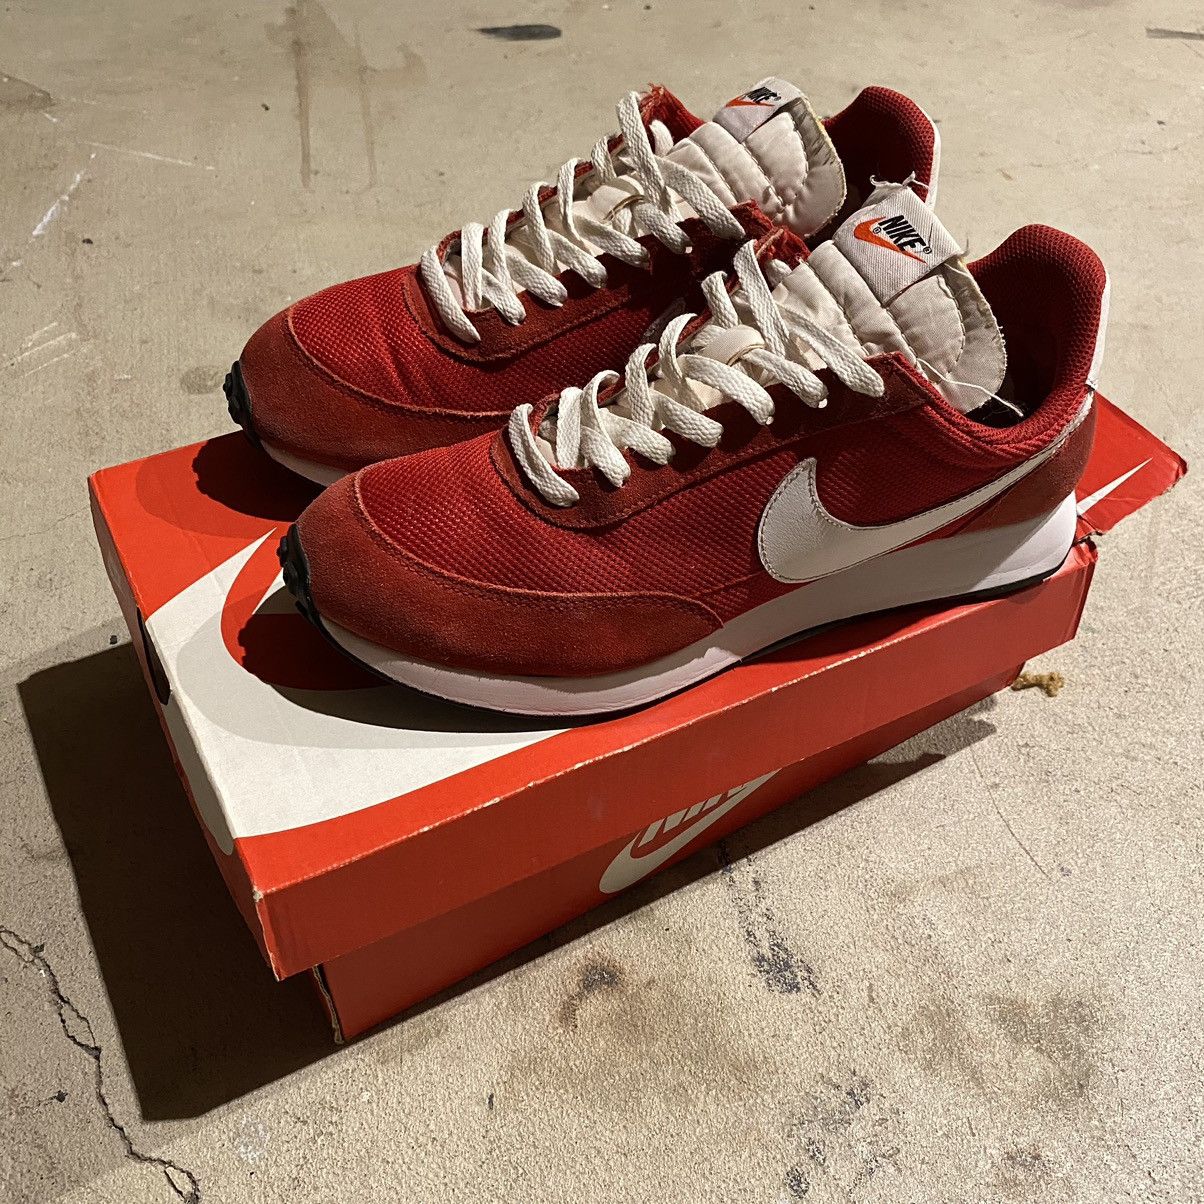 Nike Nike Air Tailwind 79’ Gym Red Size US 9 / EU 42 - 2 Preview